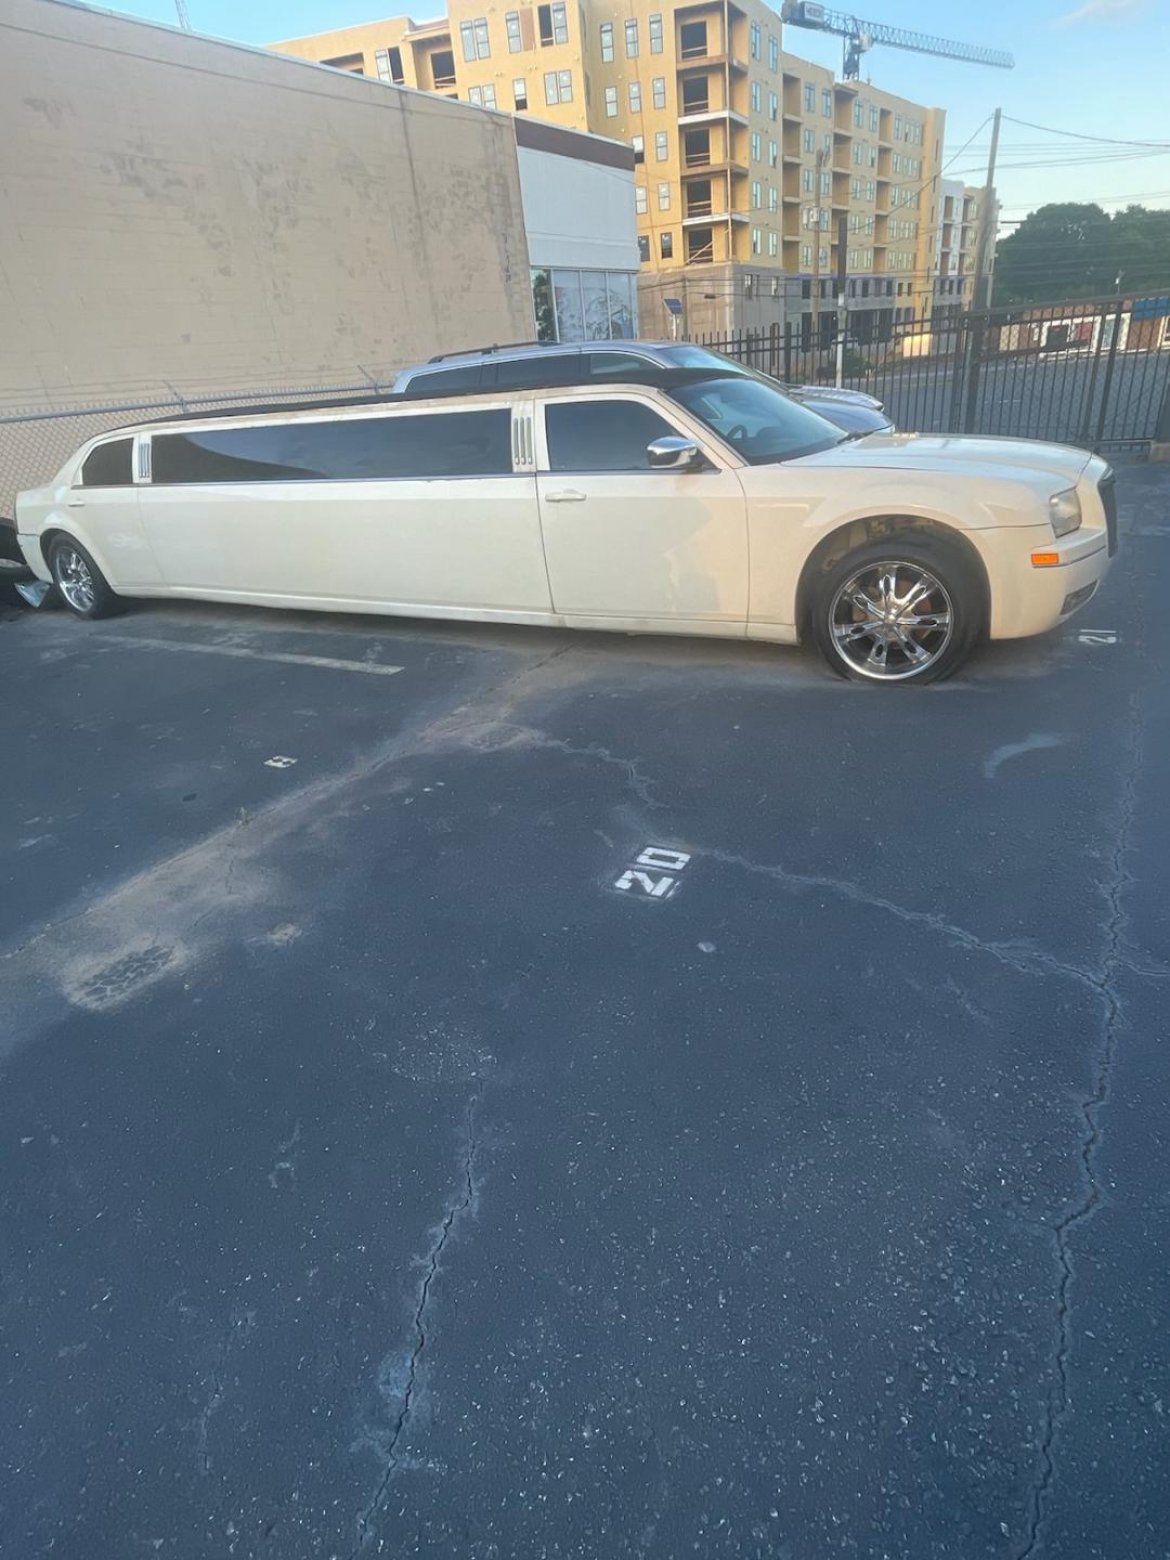 Limousine for sale: 2006 Chrysler Chrysler 30&quot; by Tiffany